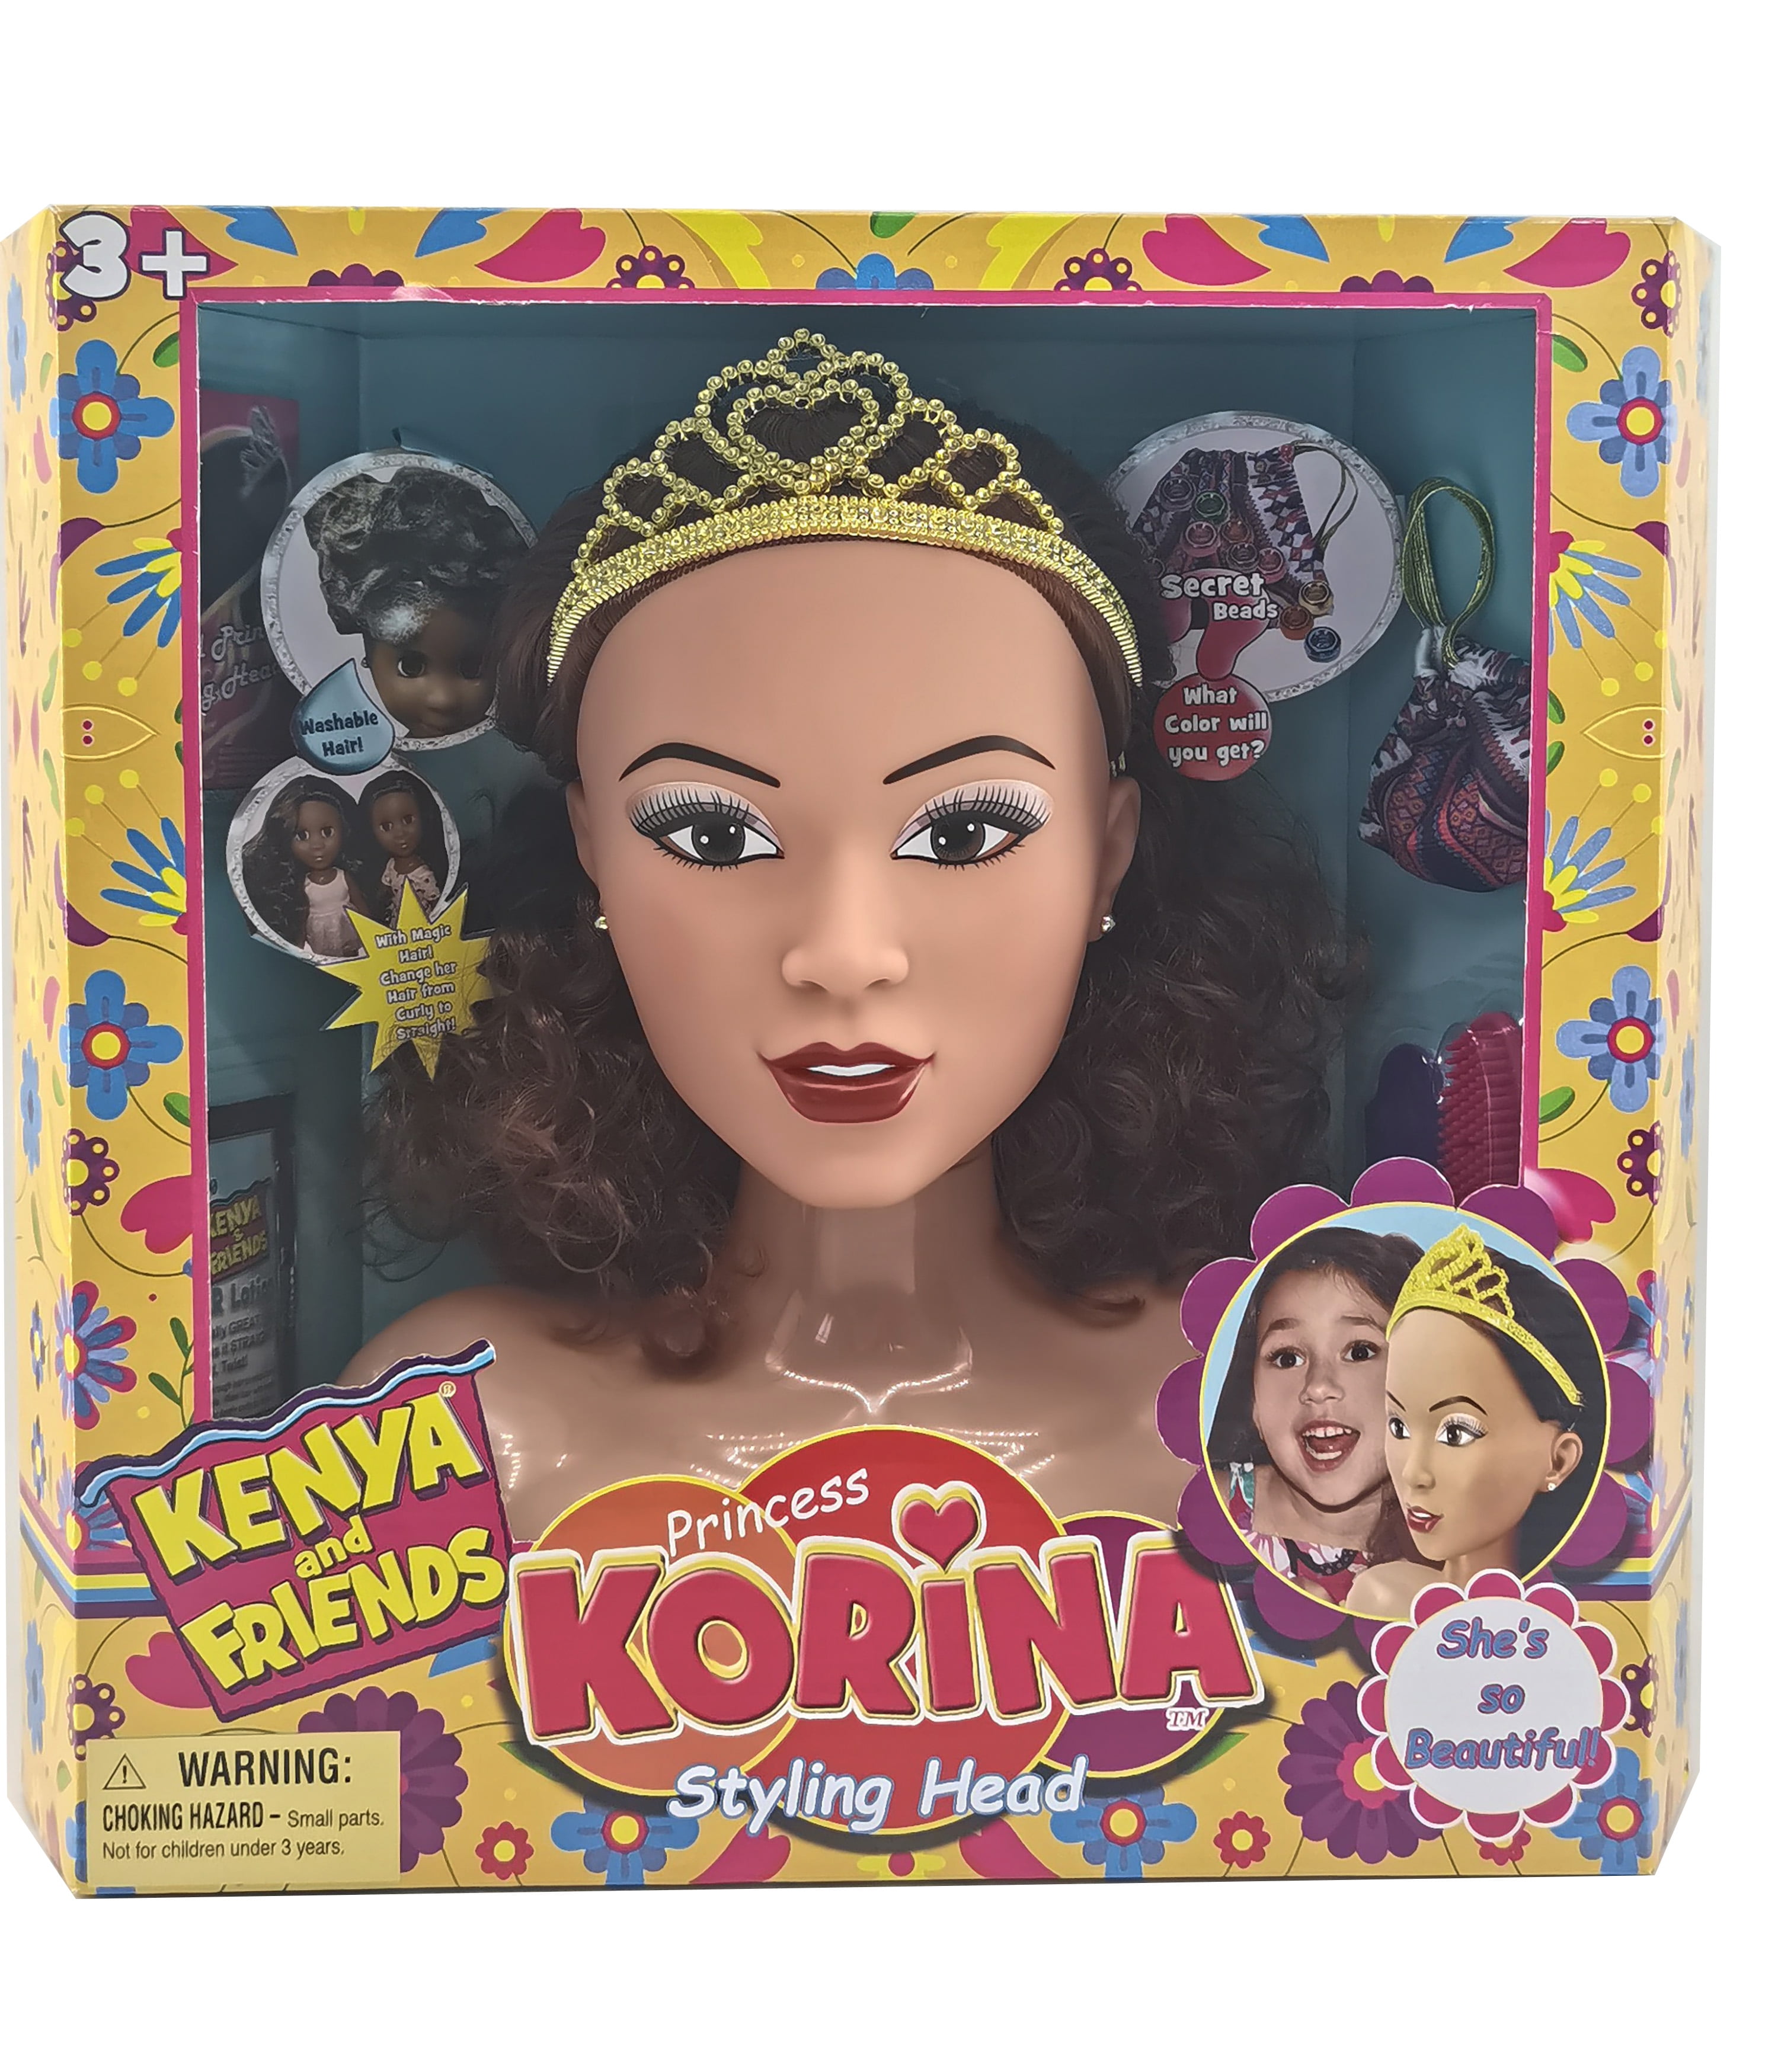 Princess Korina Styling Head Doll from the Kenya and Friends Collection Age  group for 3 years old and up 